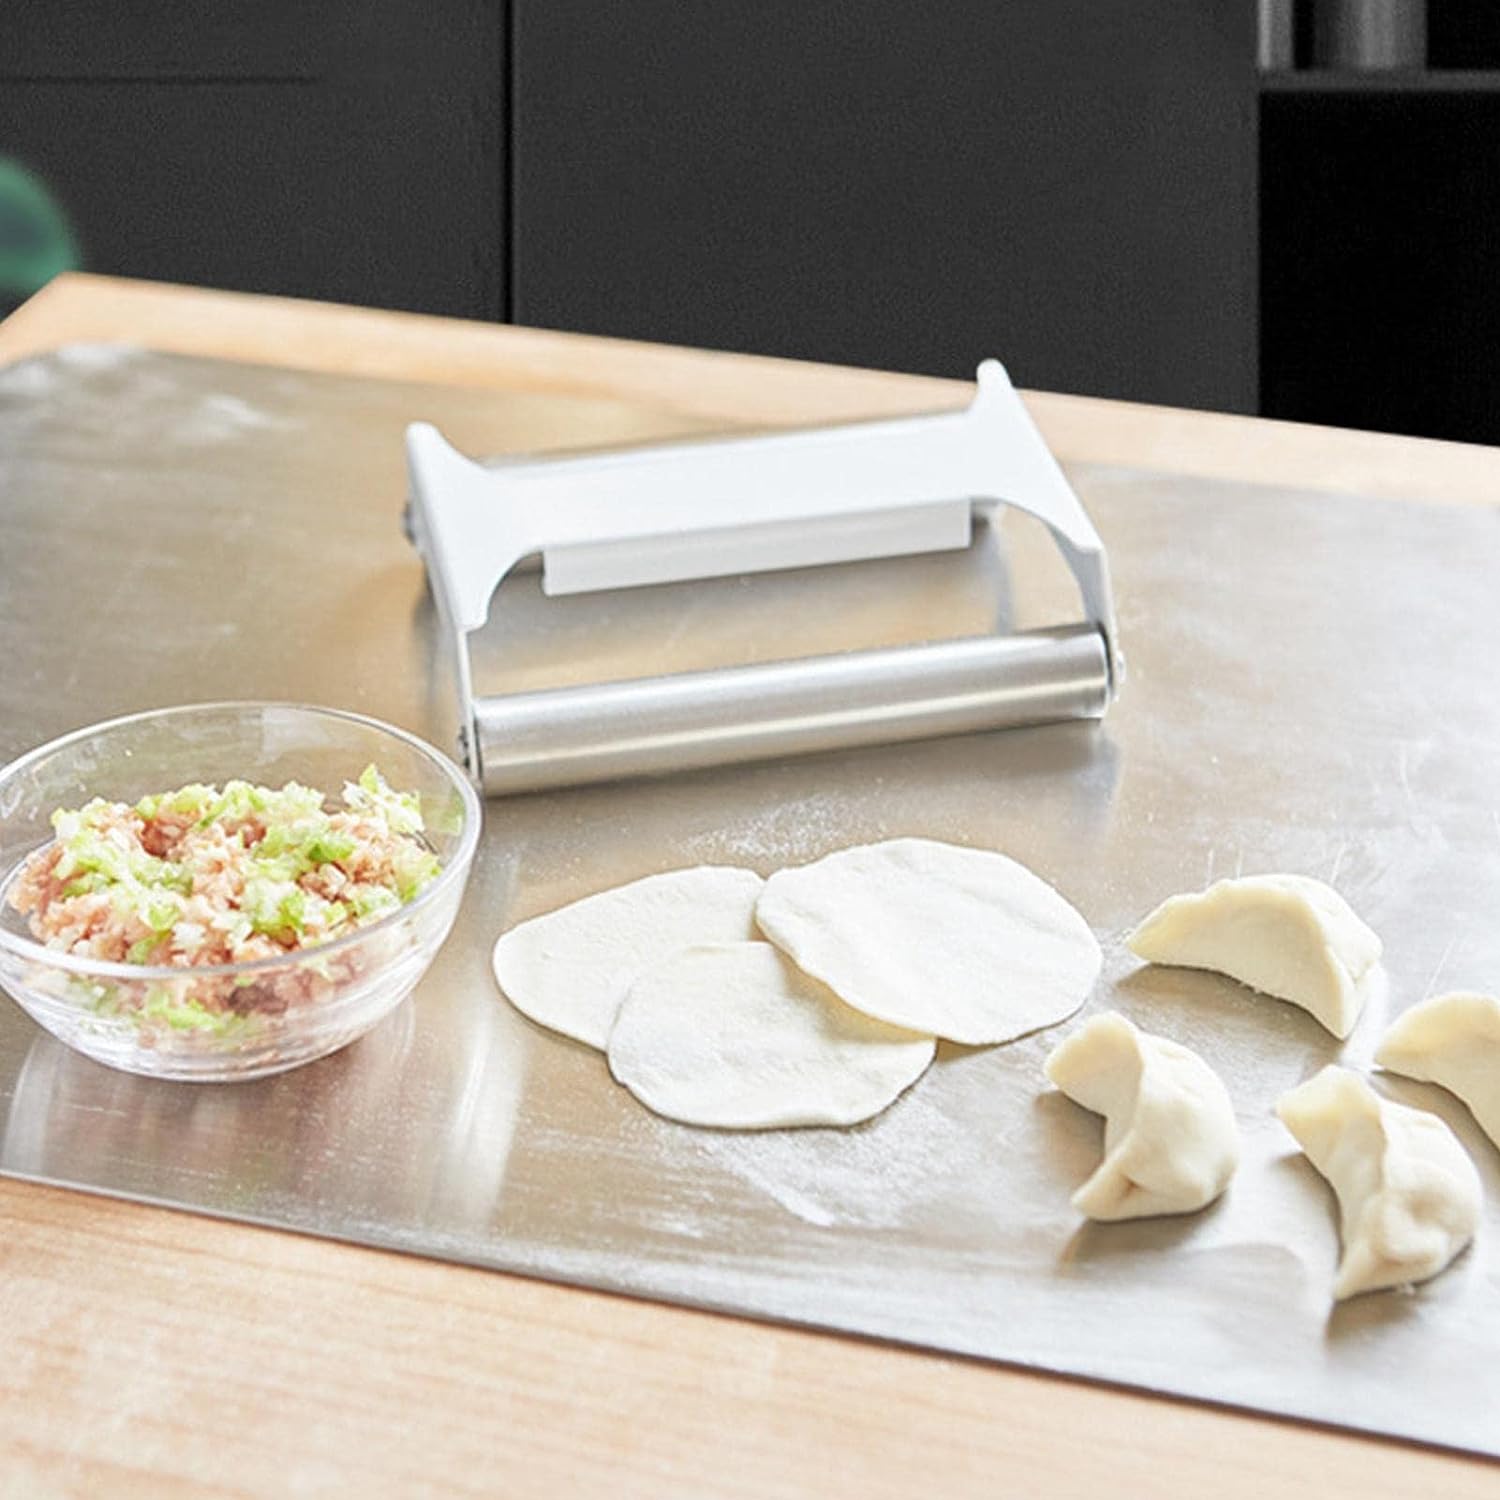 Double-Sided Stainless Steel Dough Roller for Baking placed on the table next to some Dumplings and ingredients